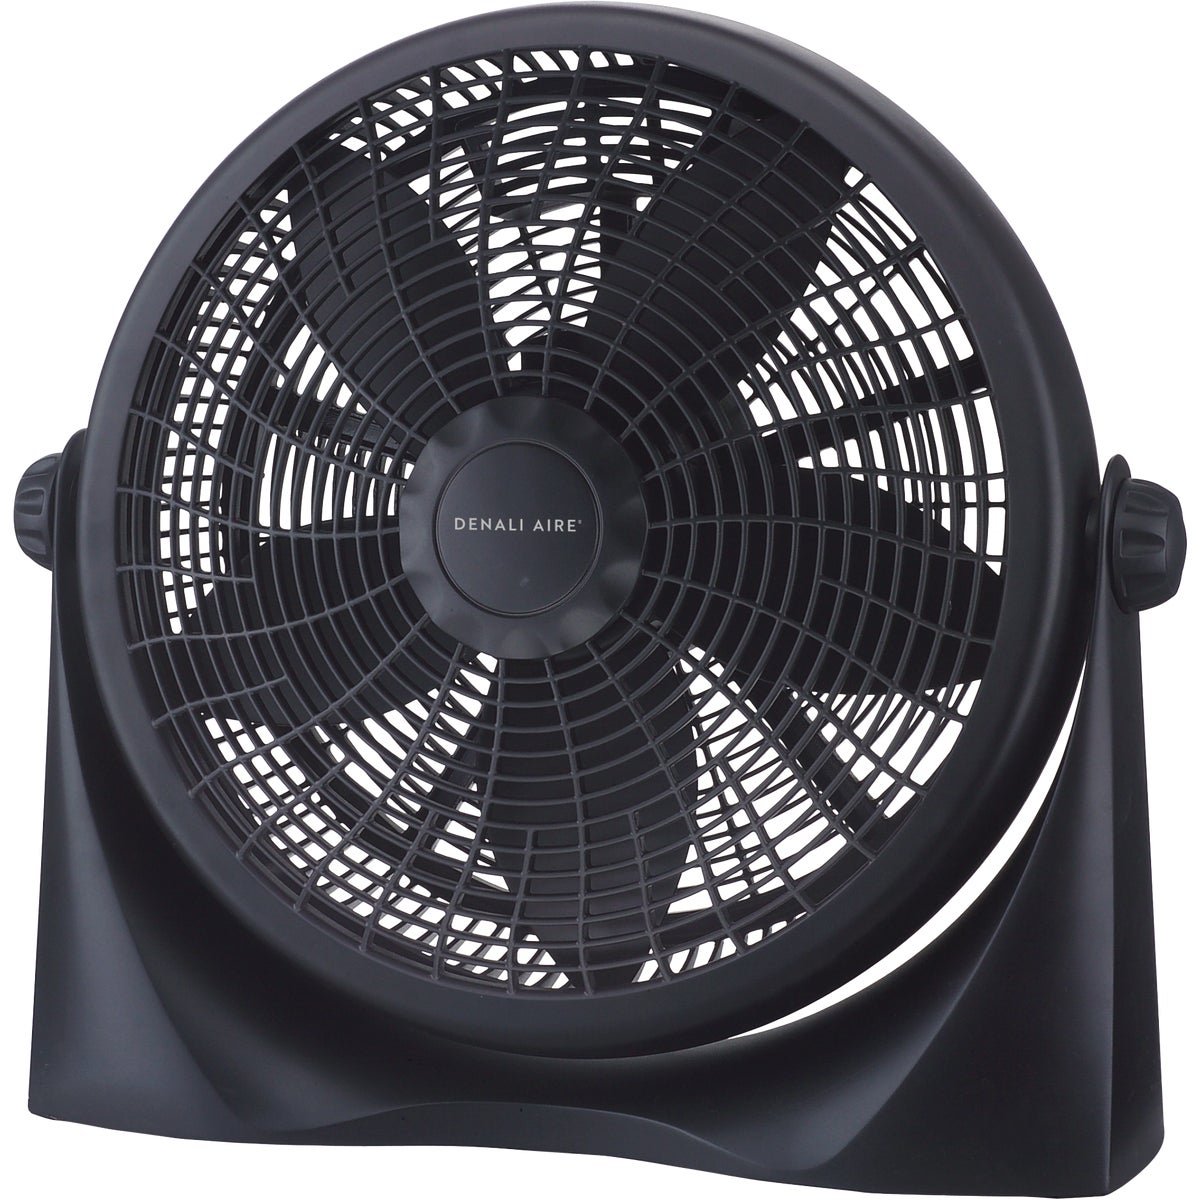 Item 531340, 20-inch air circulator ideal for areas that are short on floor space.